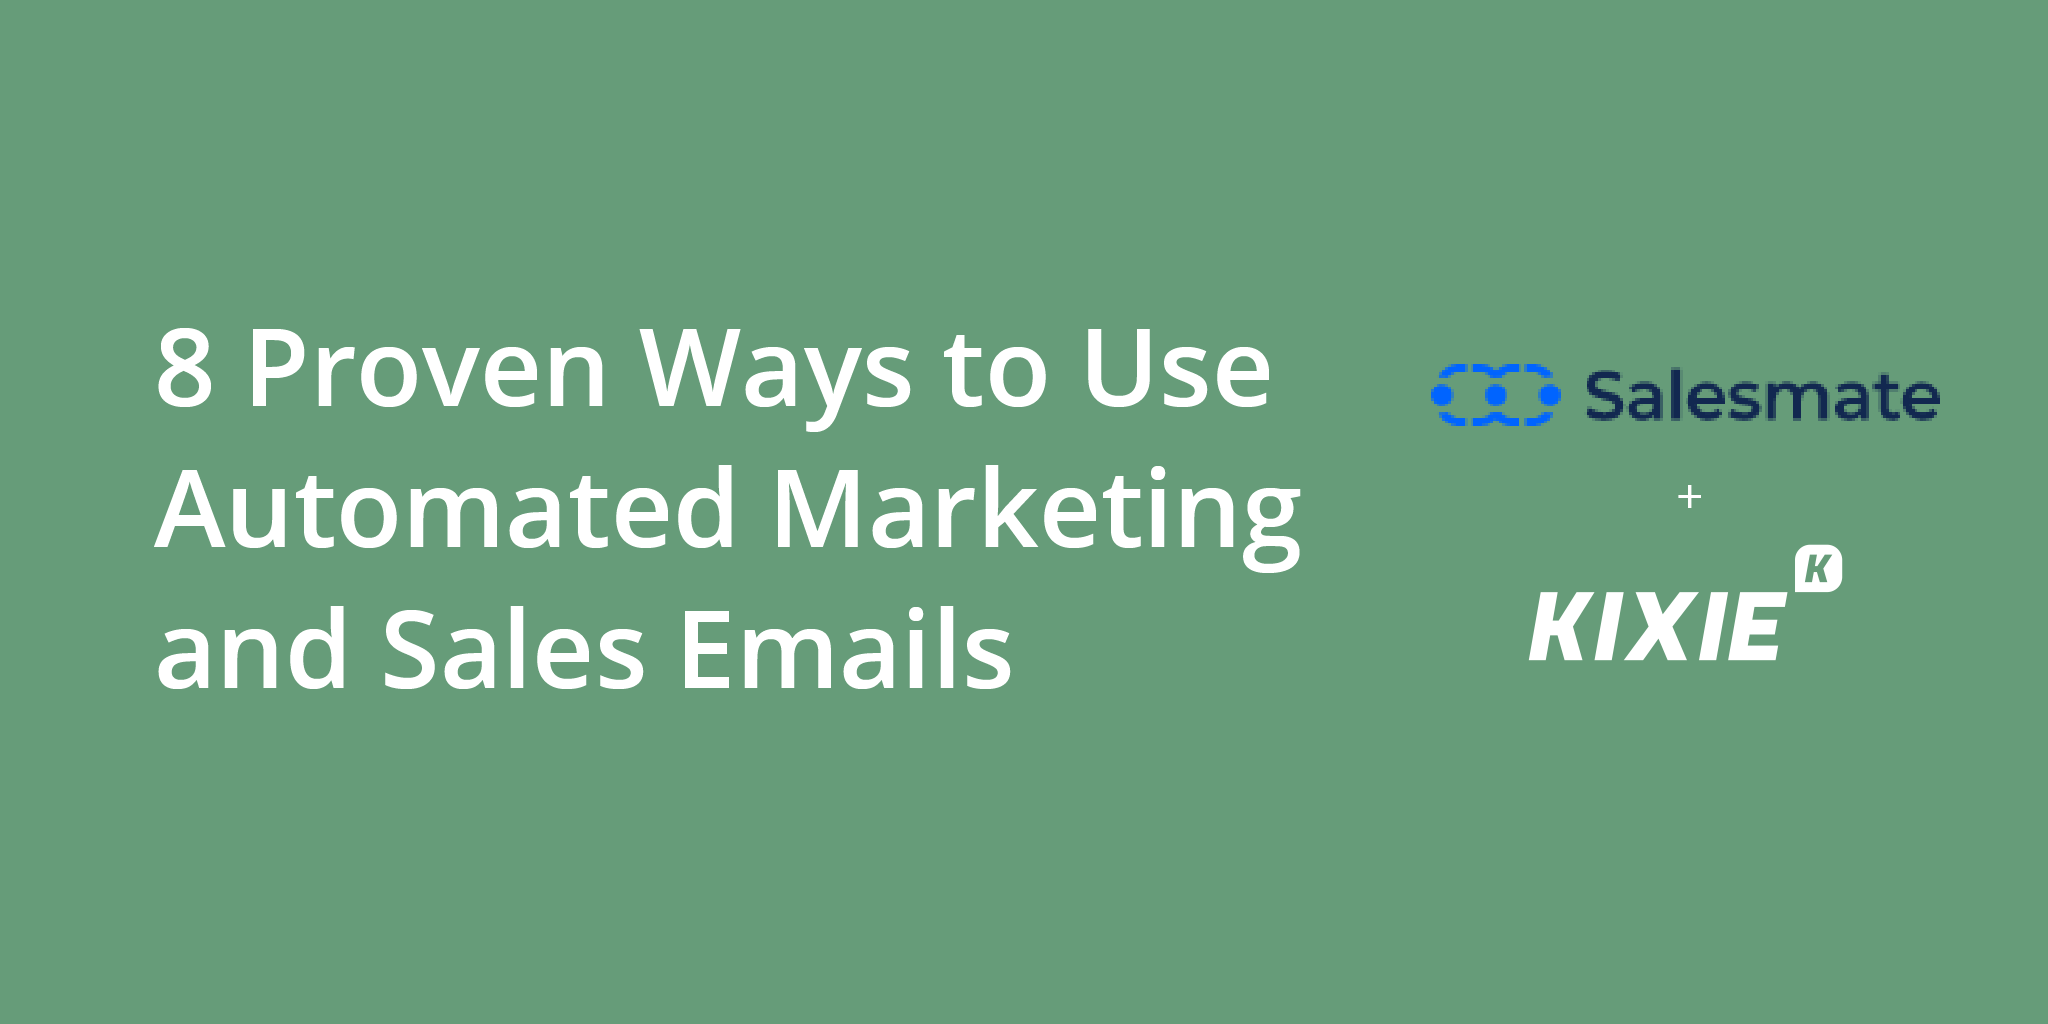 8 Proven Ways to Use Automated Marketing and Sales Emails